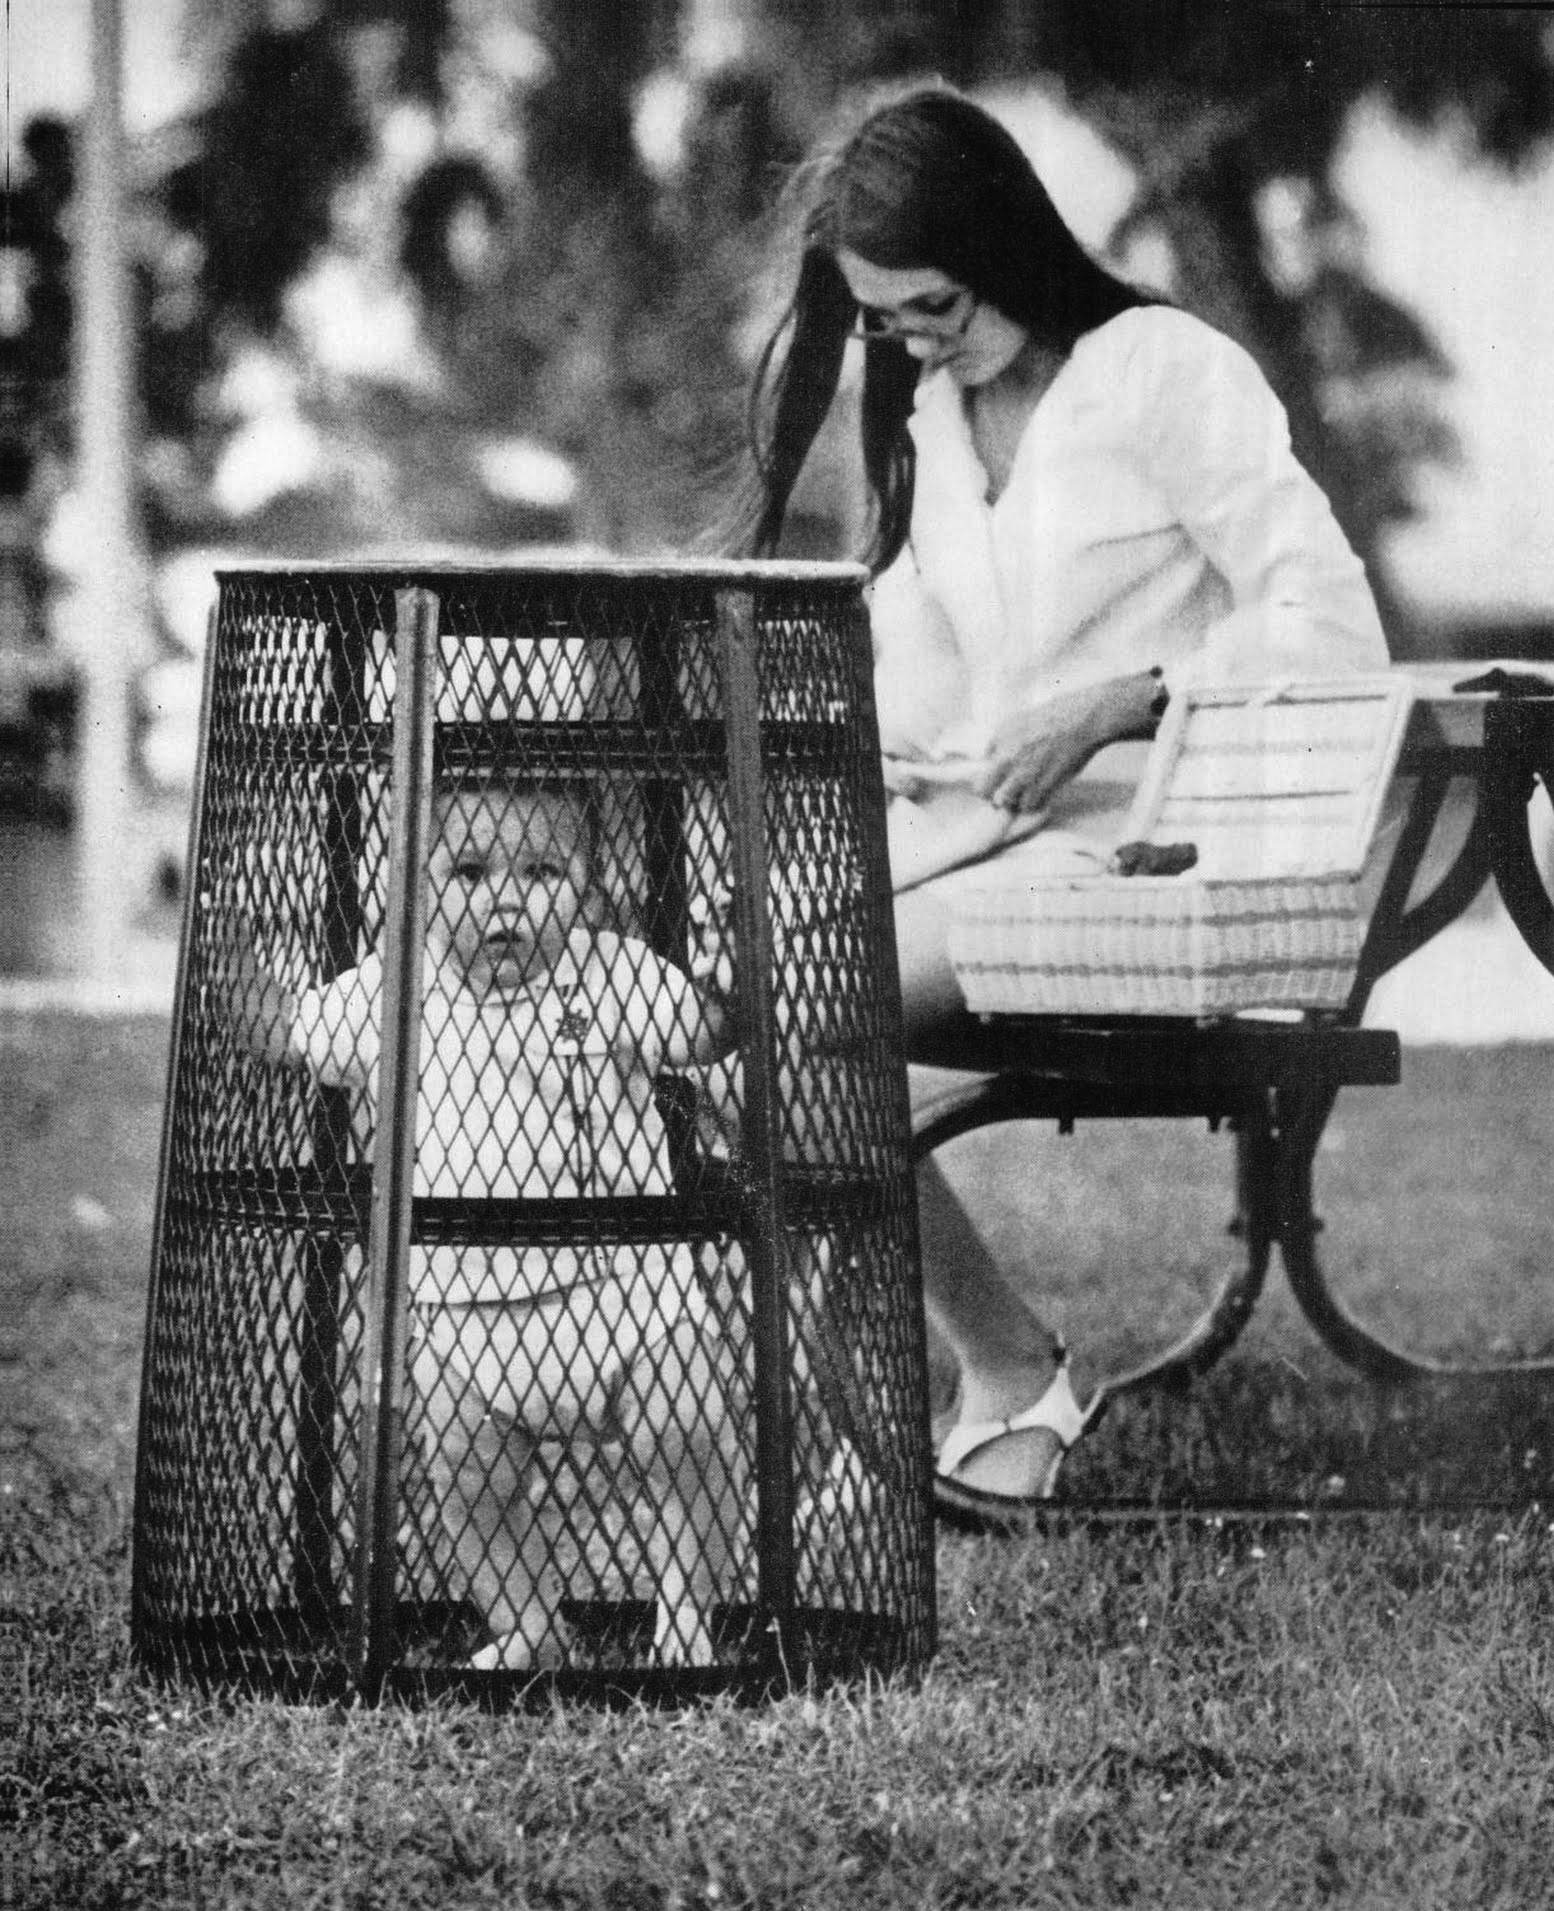 Necessity is the mother of invention, circa 1969